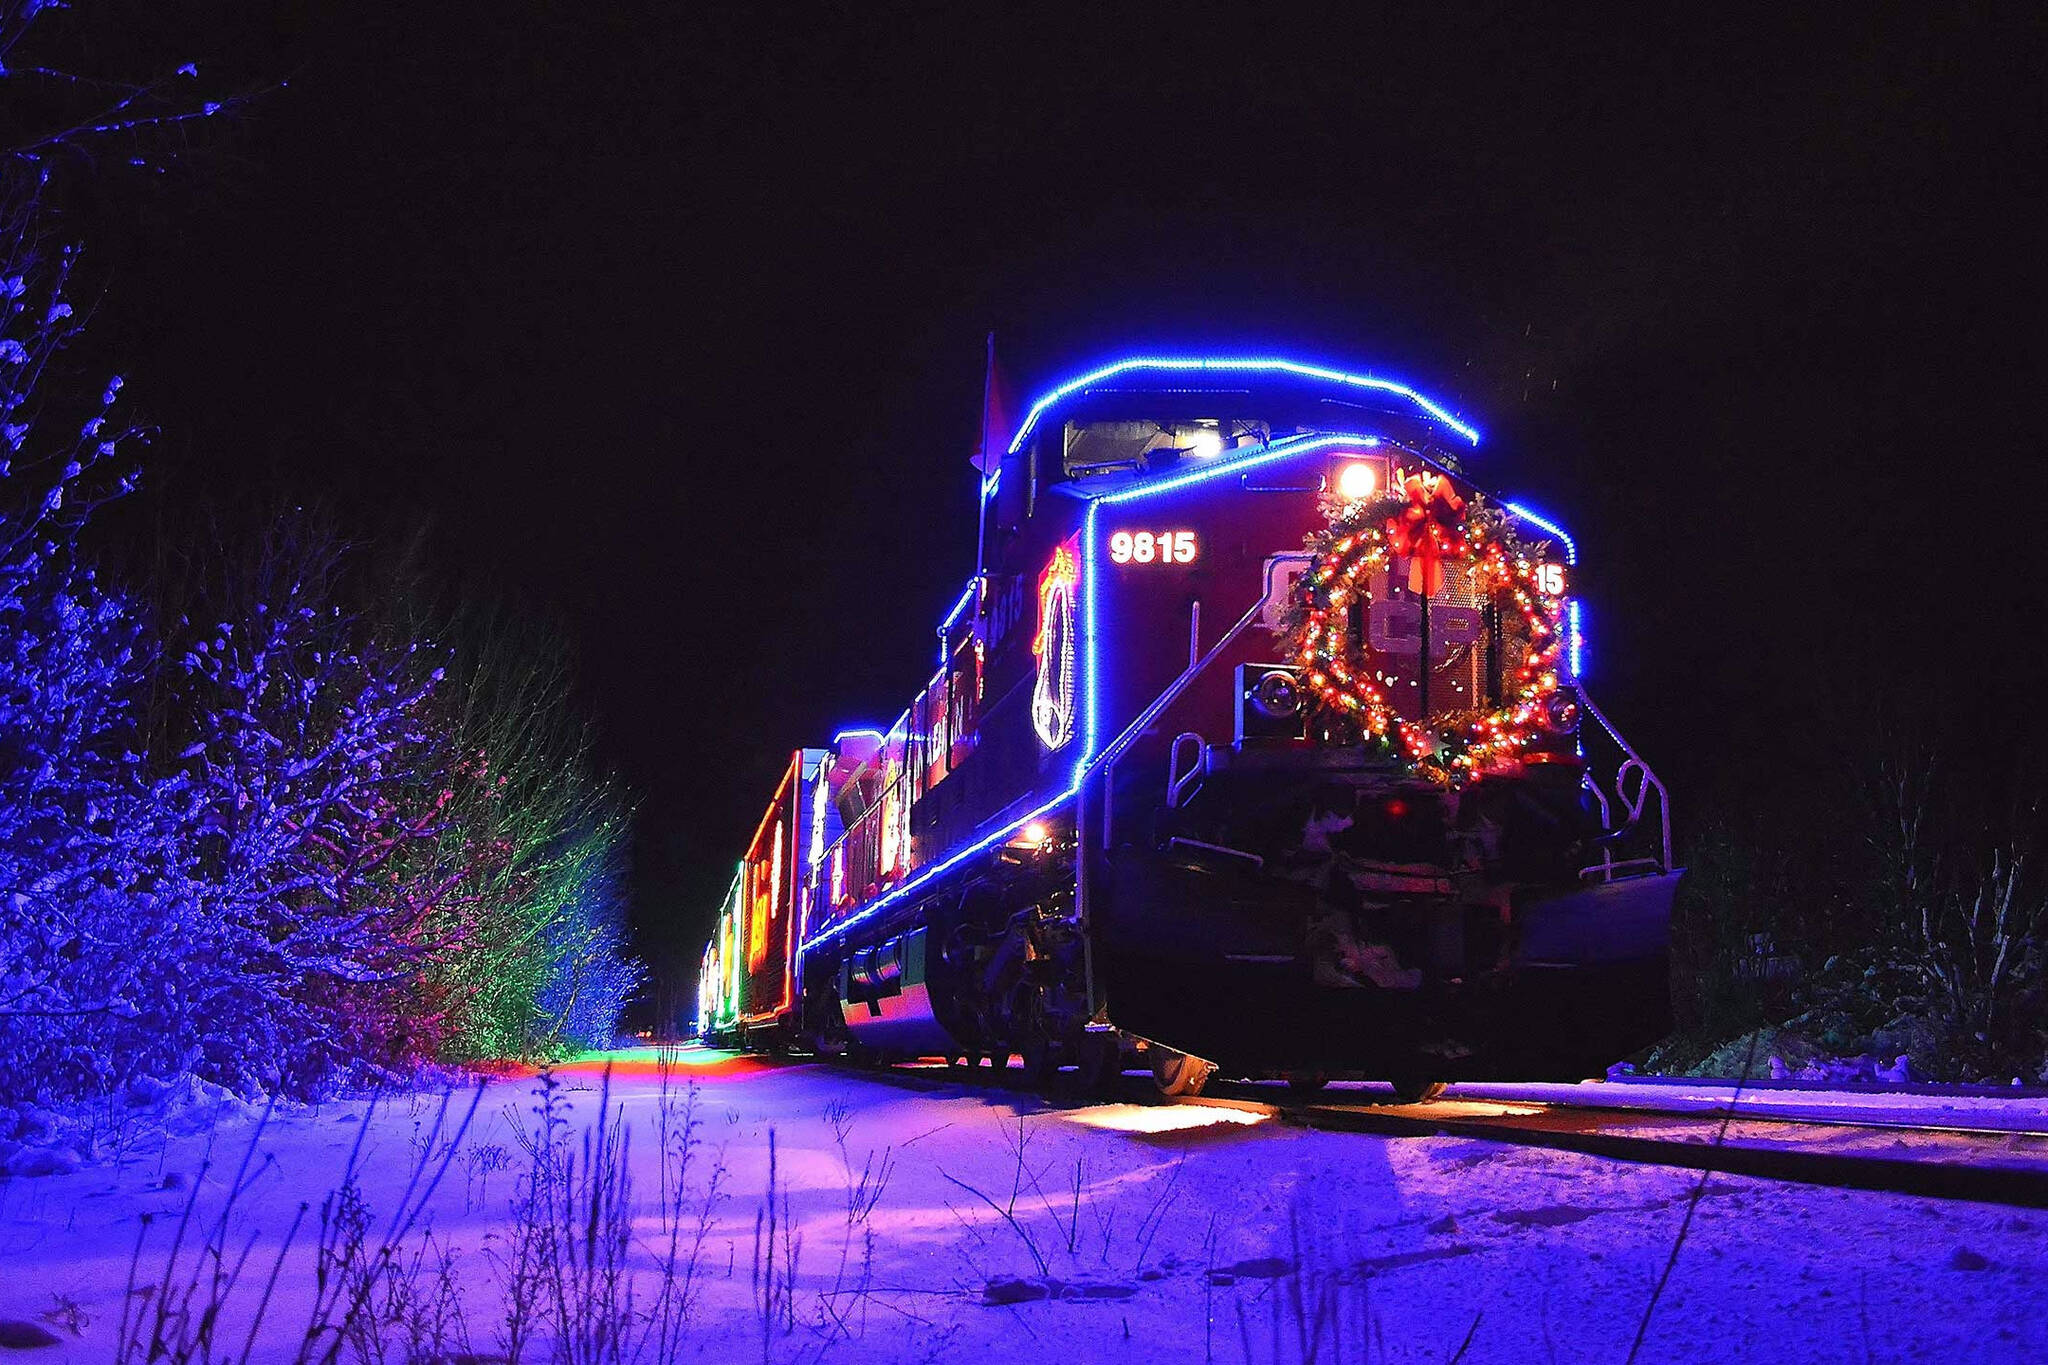 Magical holiday train will roll through Toronto next month